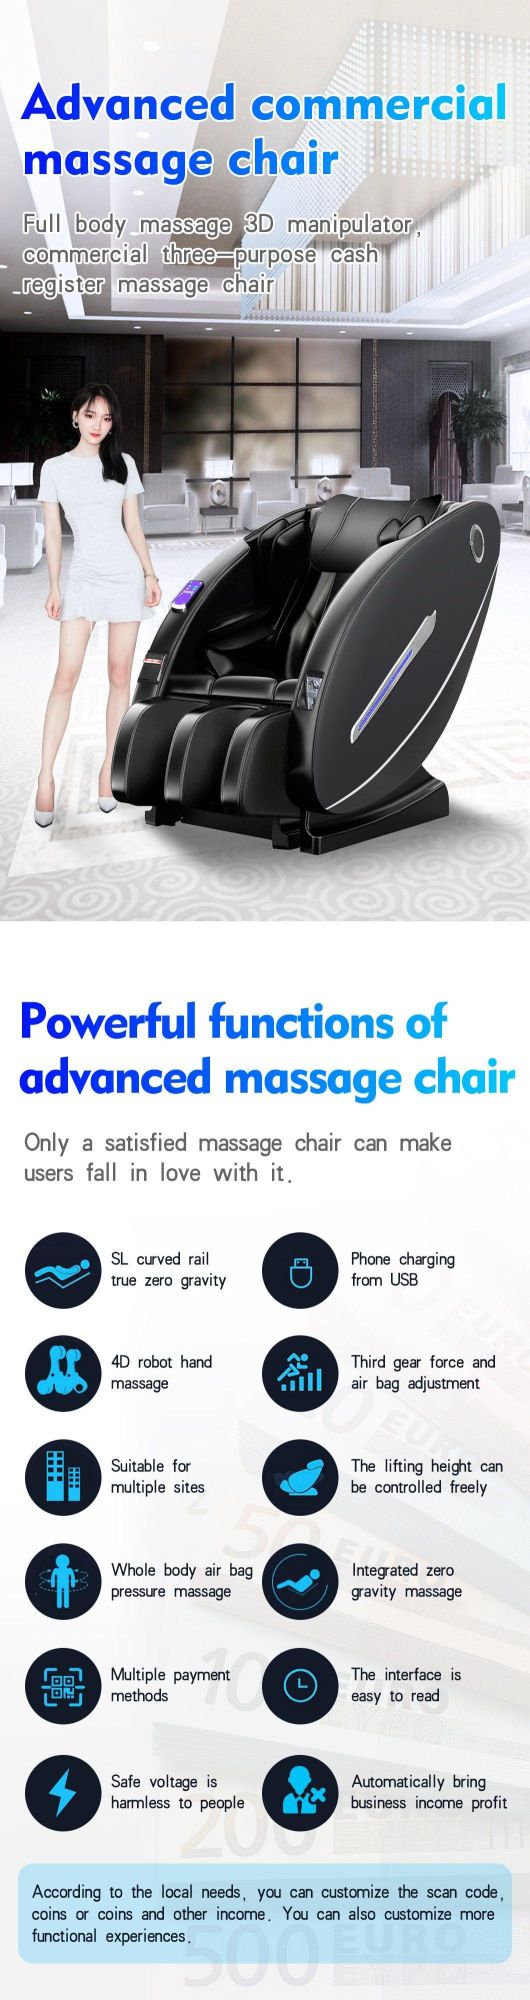 Best Selling Public Vending Coin Paper Money Massage Chair with Bill Acceptor